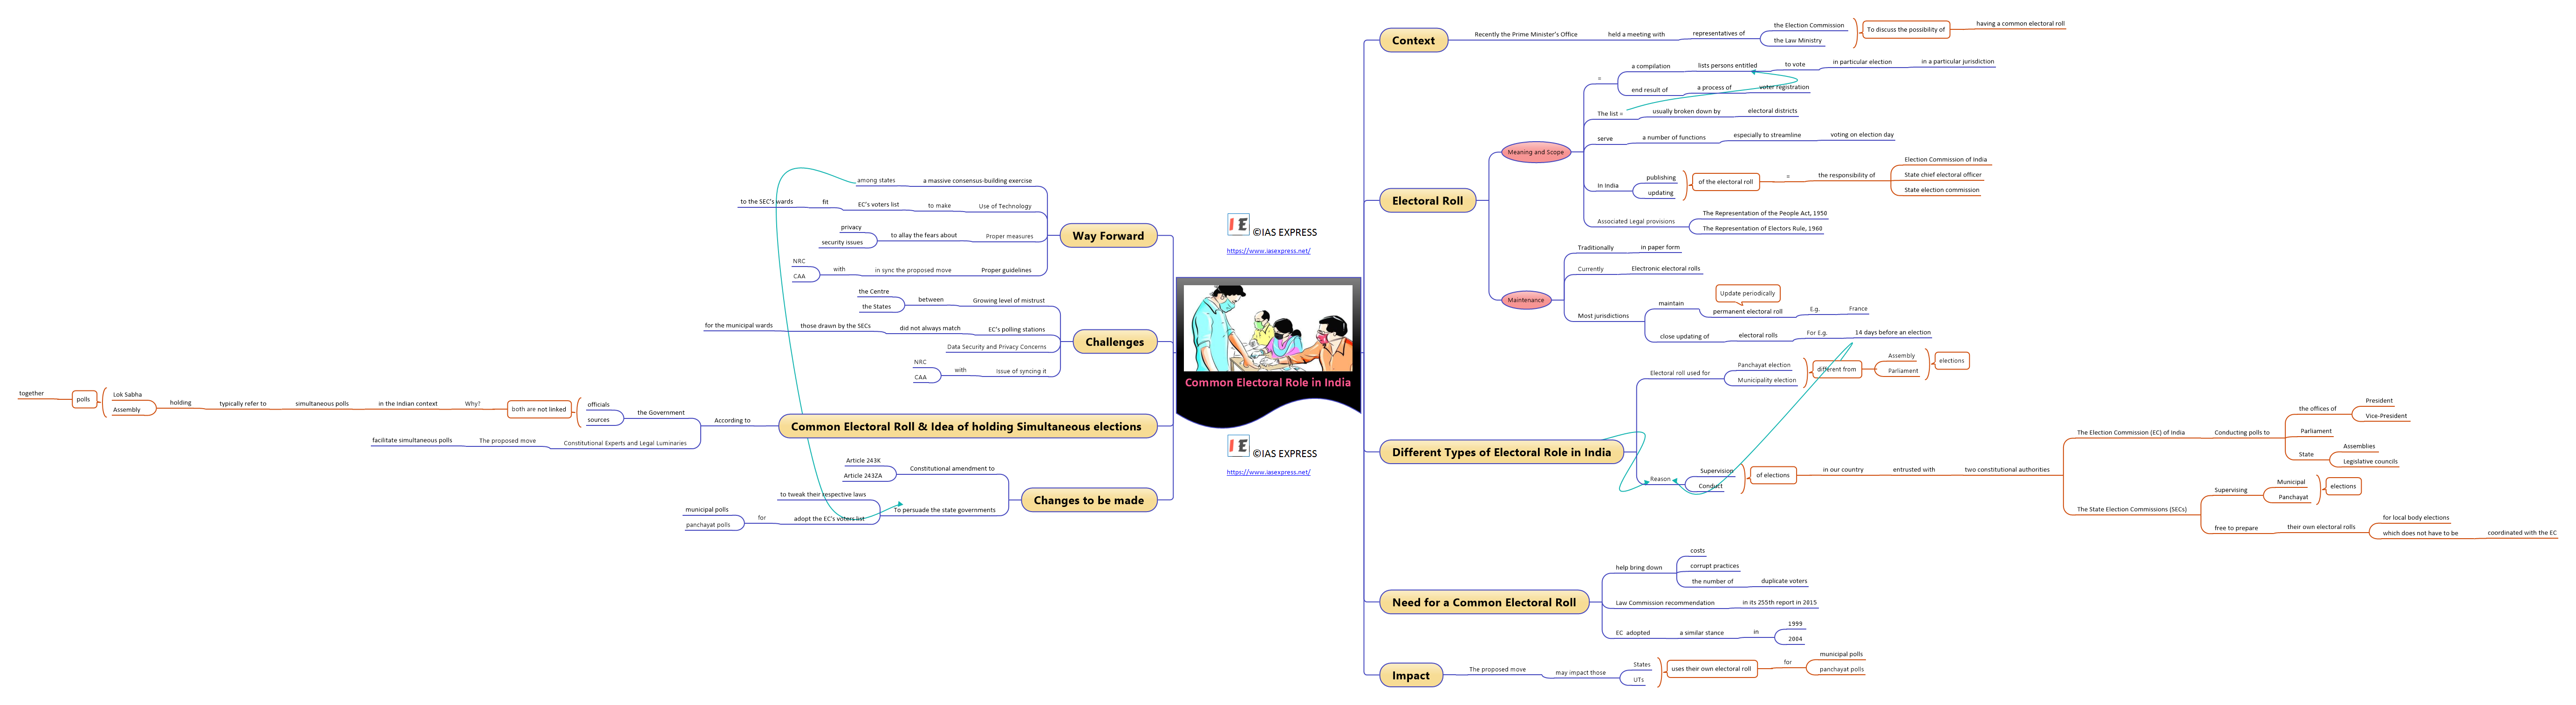 Mind map of Common Electoral Role in India